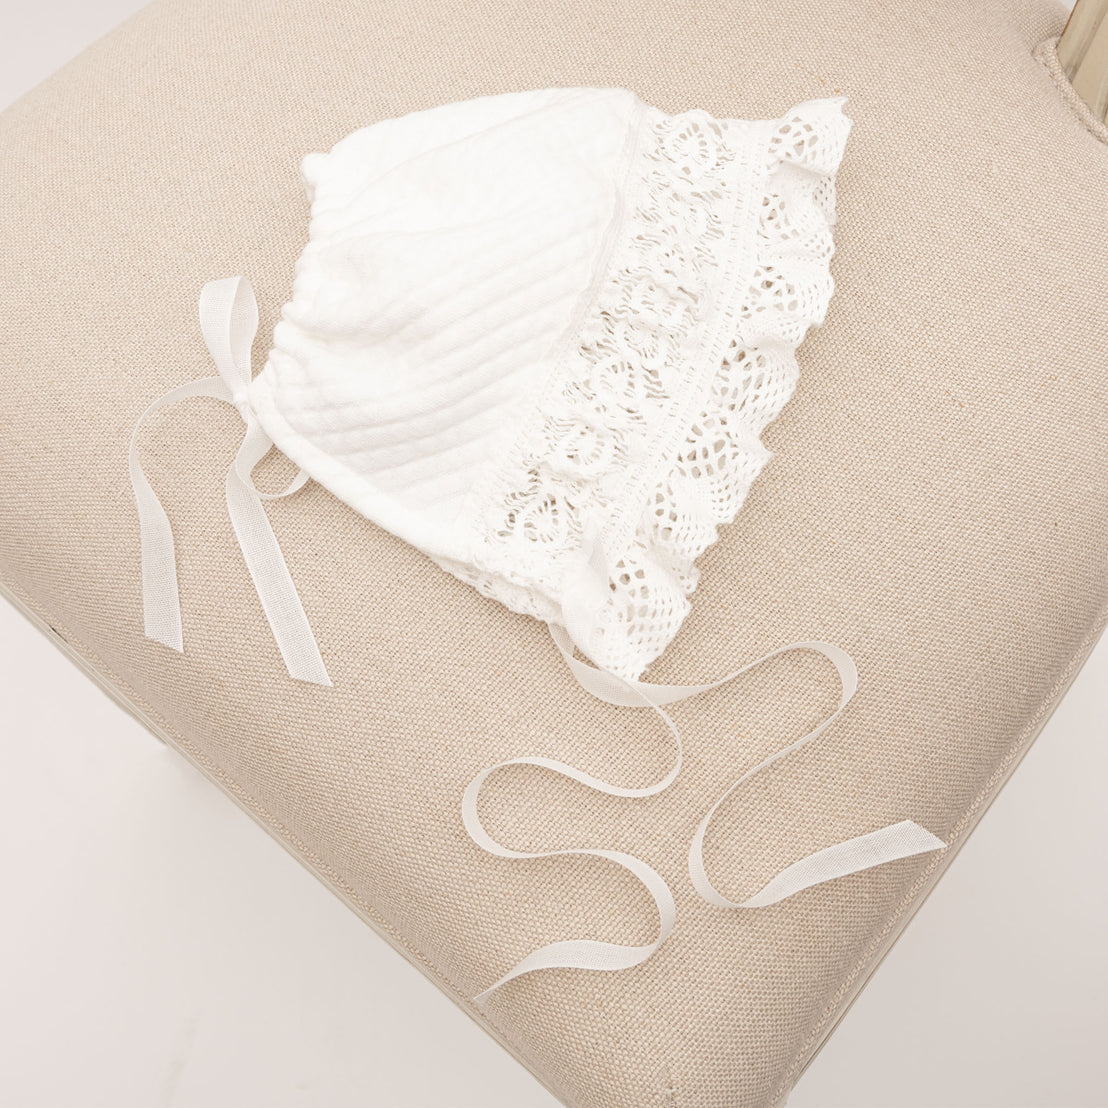 Flat lay of the Lily Quilted Cotton Bonnet showcasing the details of the soft stretch lace trim in light ivory and ruffle detail